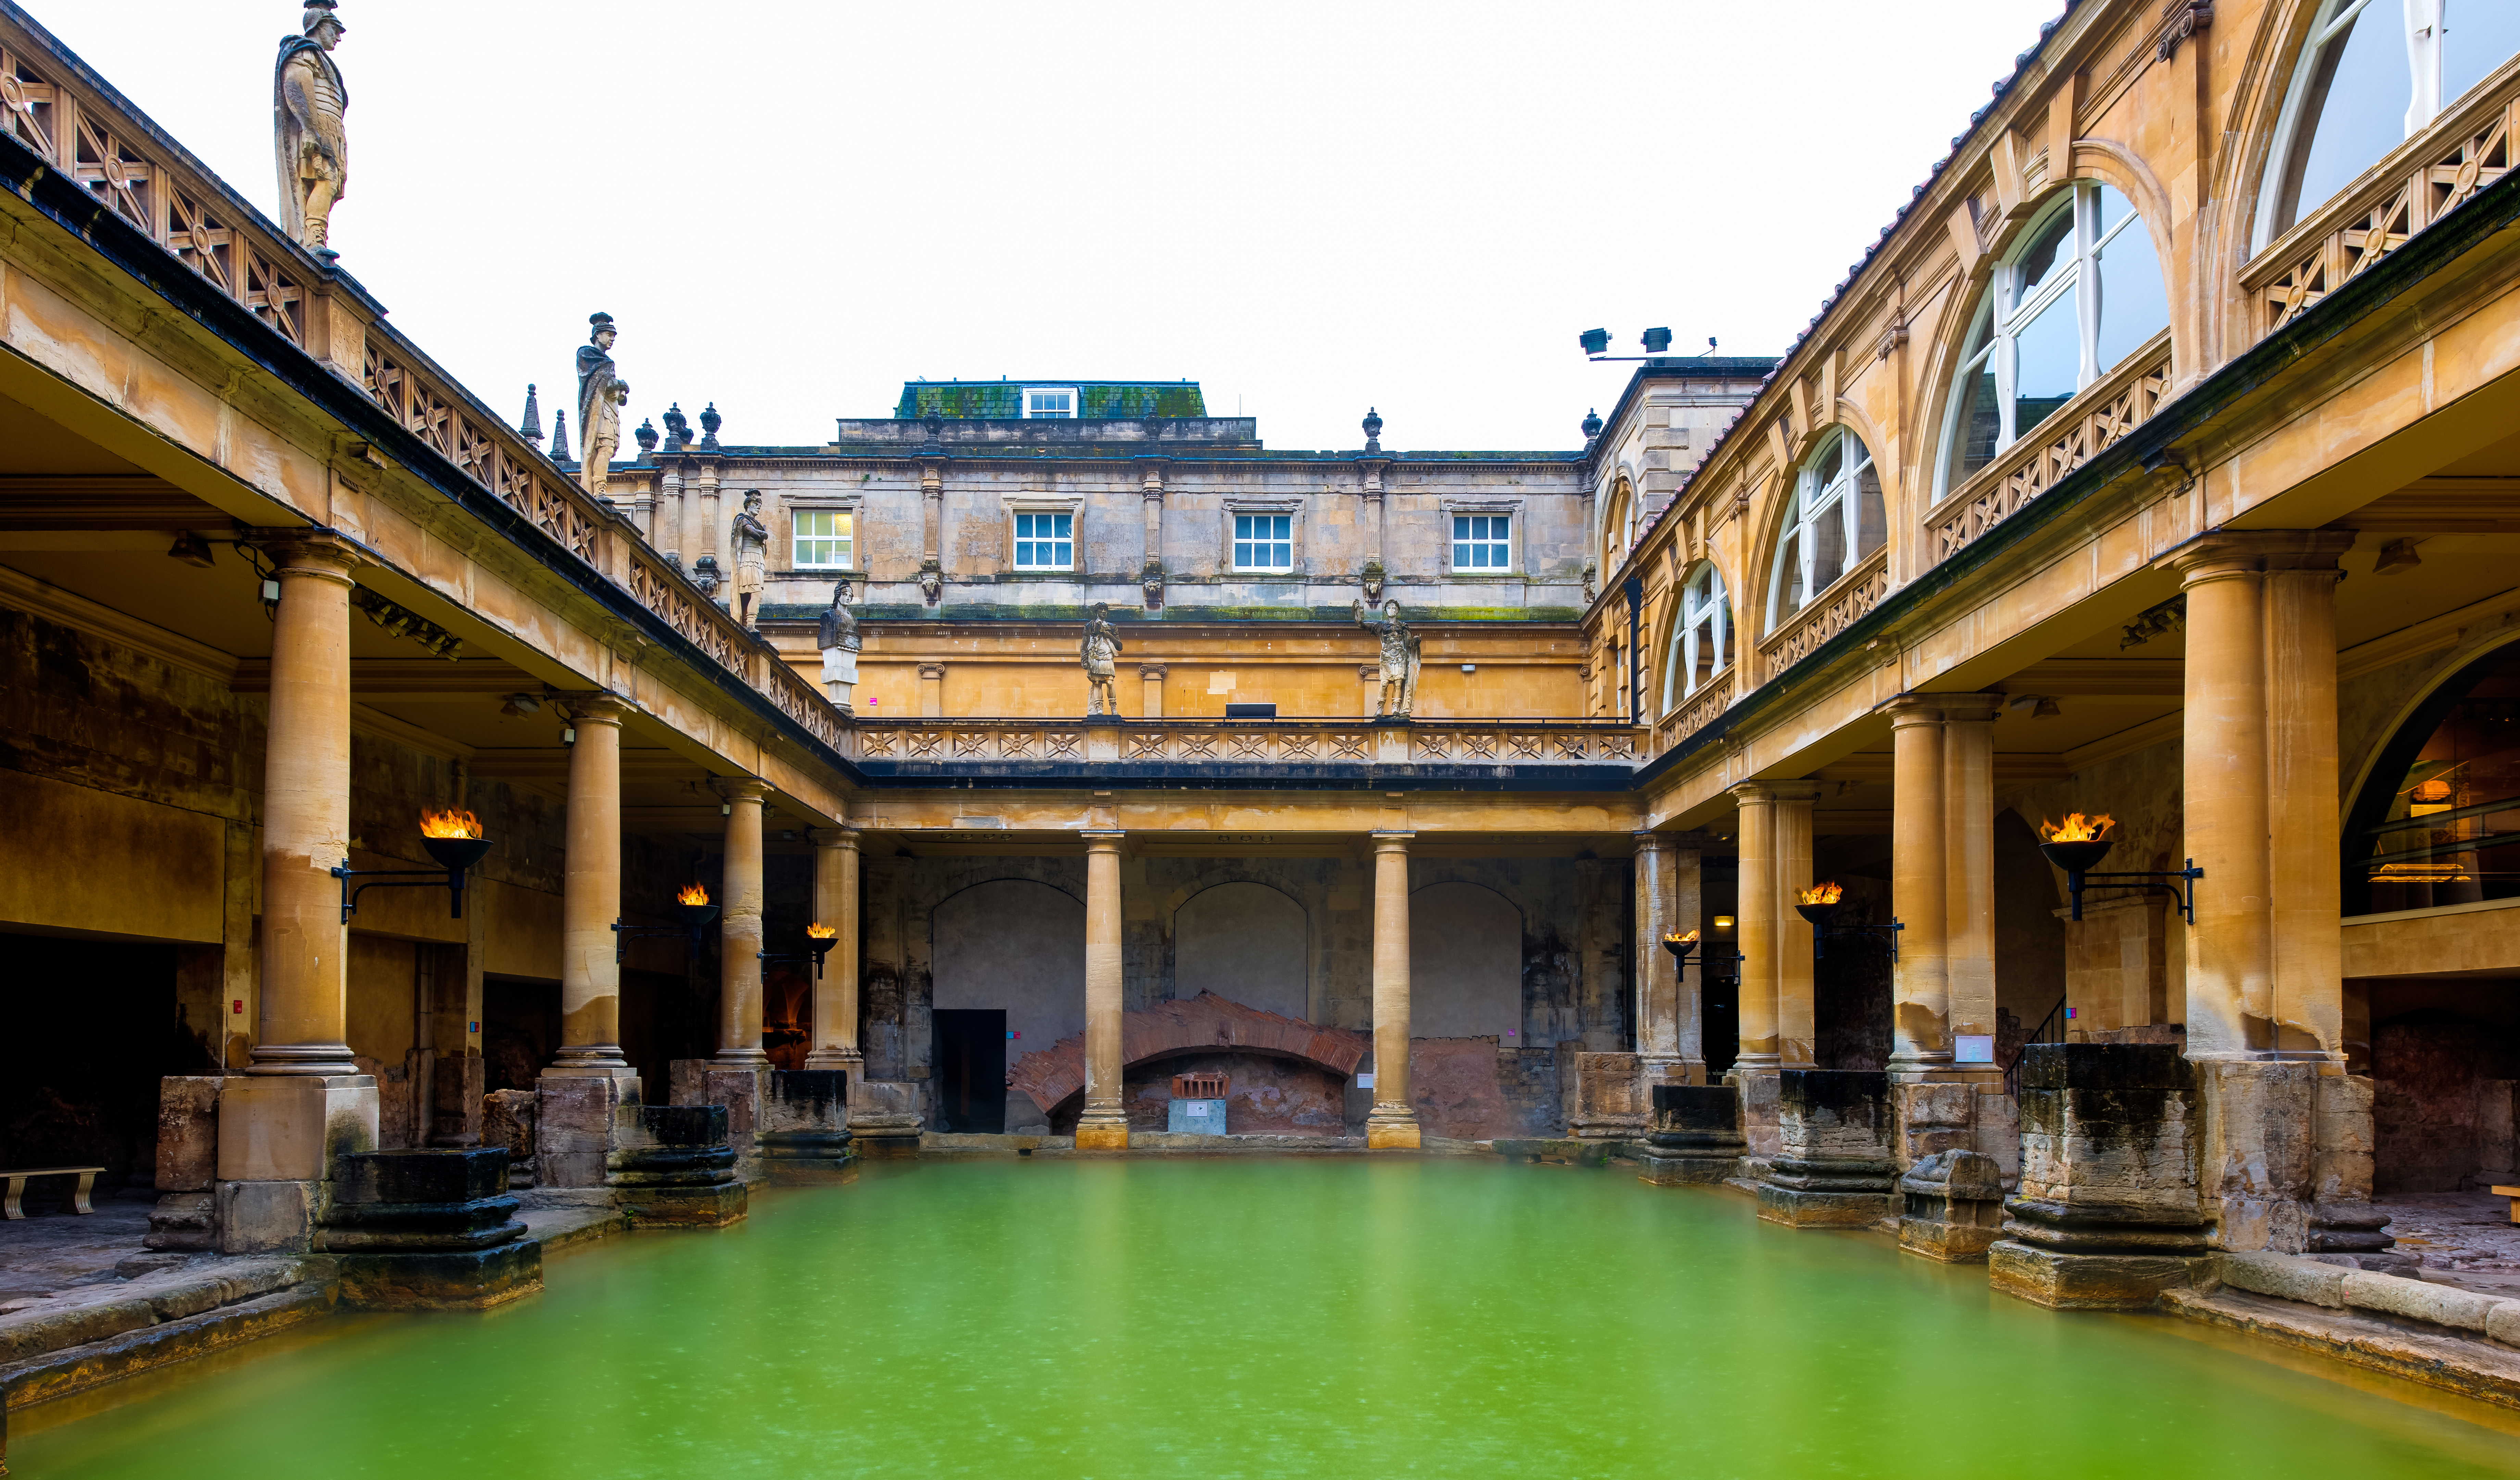 places of interest in bath uk